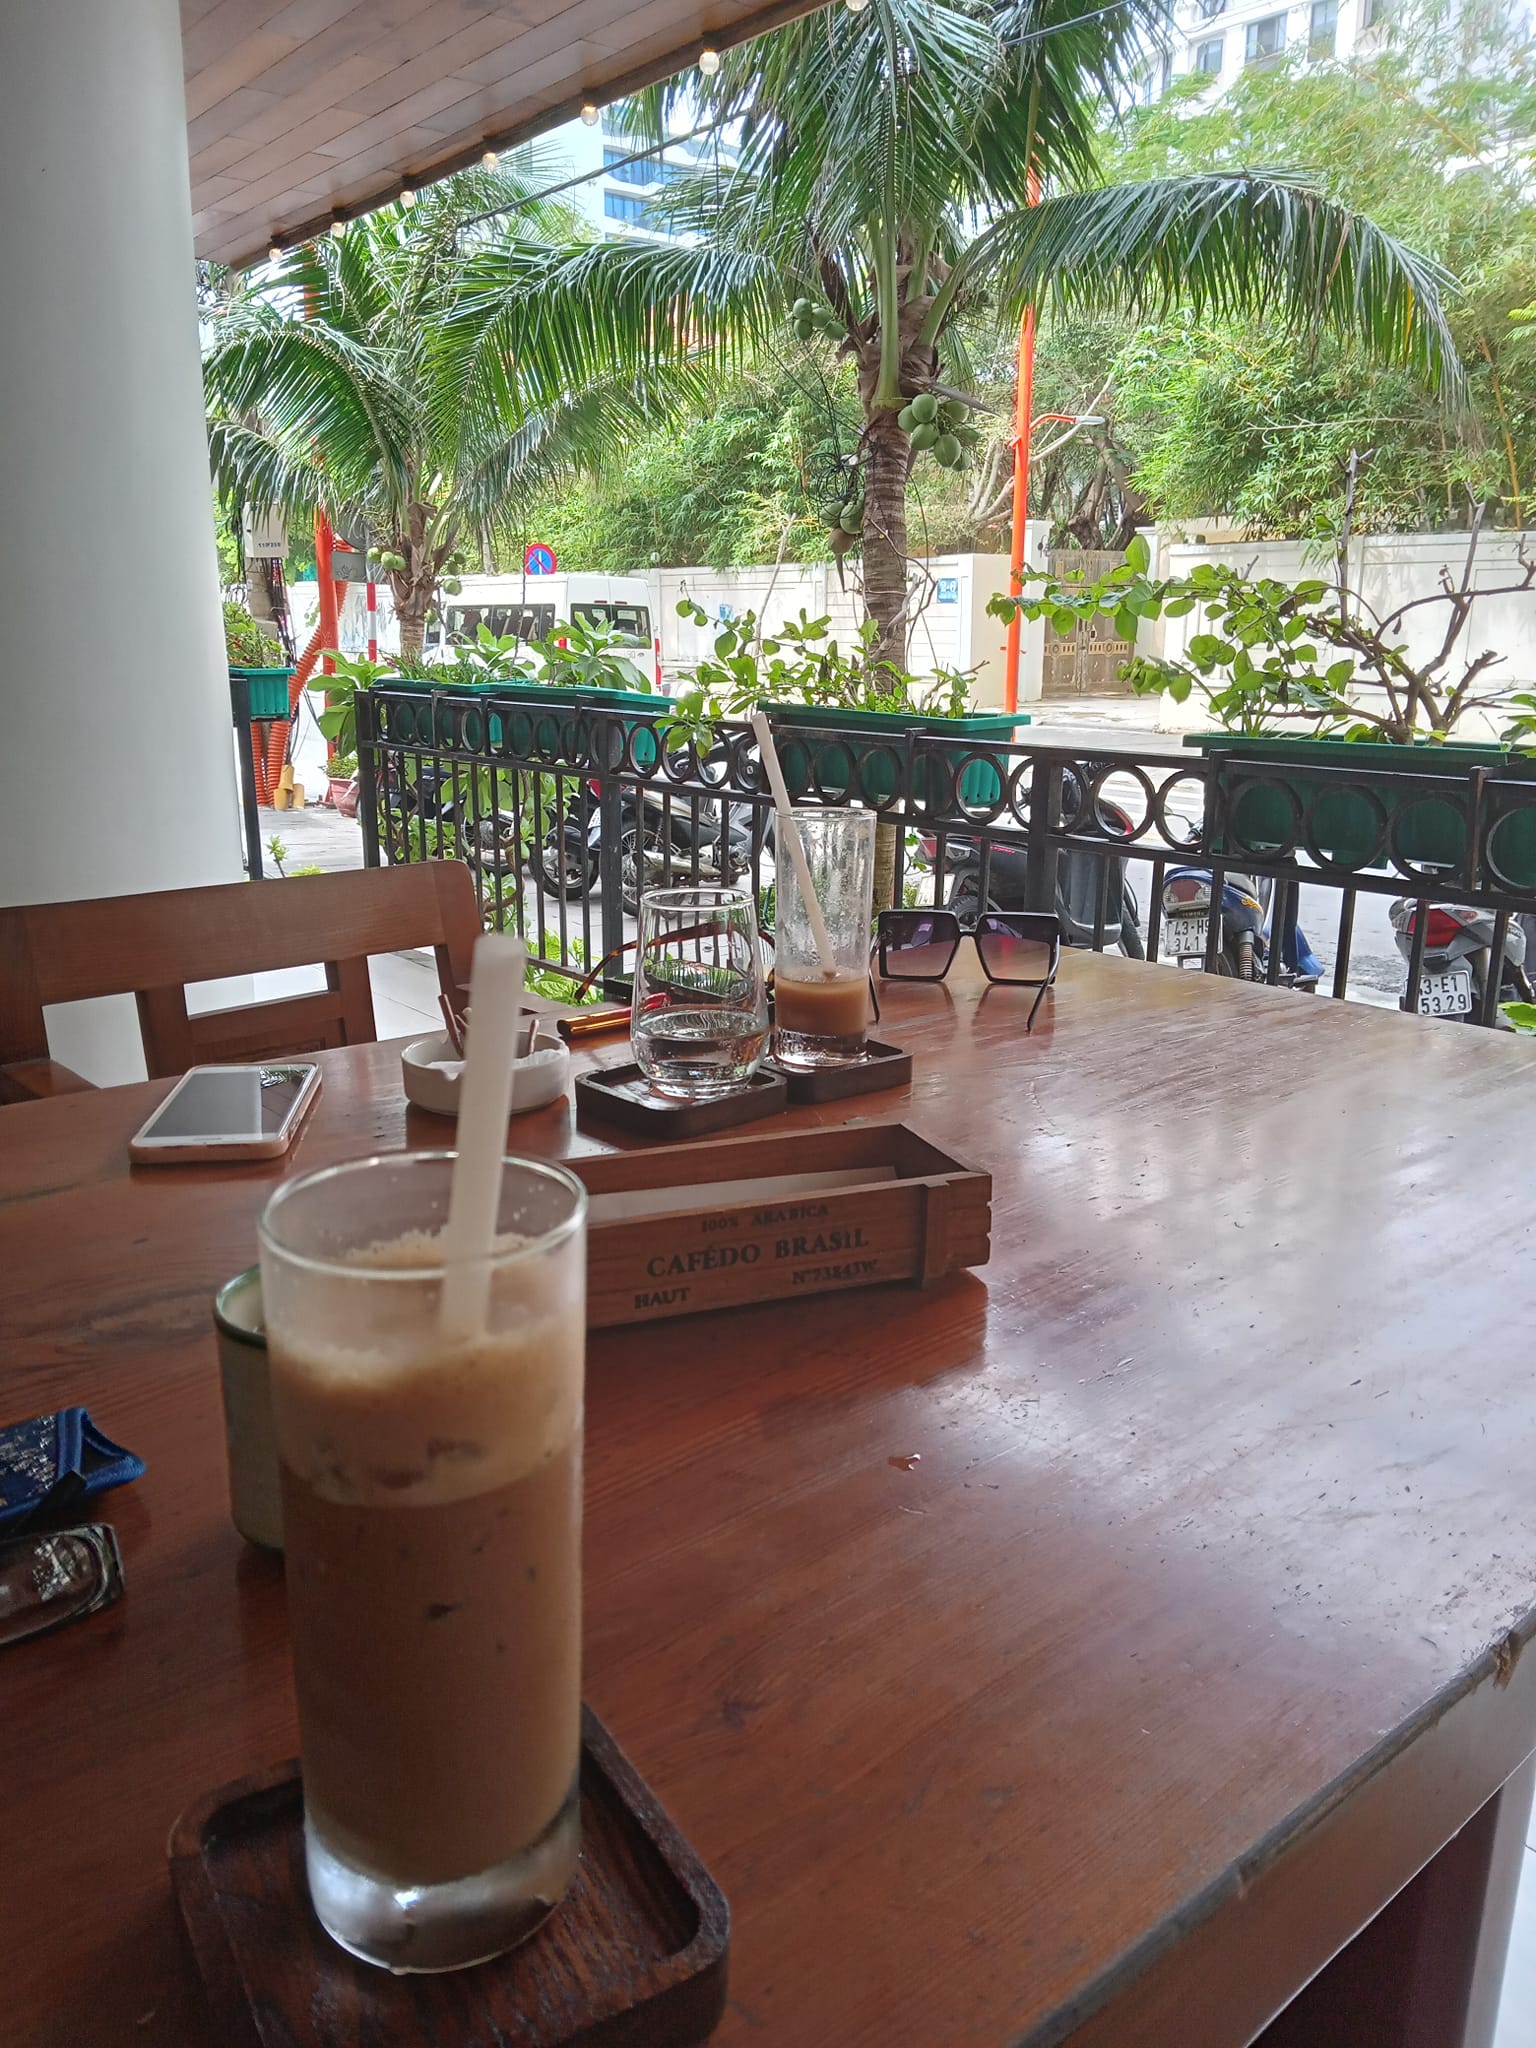 A Vietnamese iced coffee drink in a tall glass with a straw, on the table of an open air cafe in Vietnam, with lush palm fronds lining the open walls